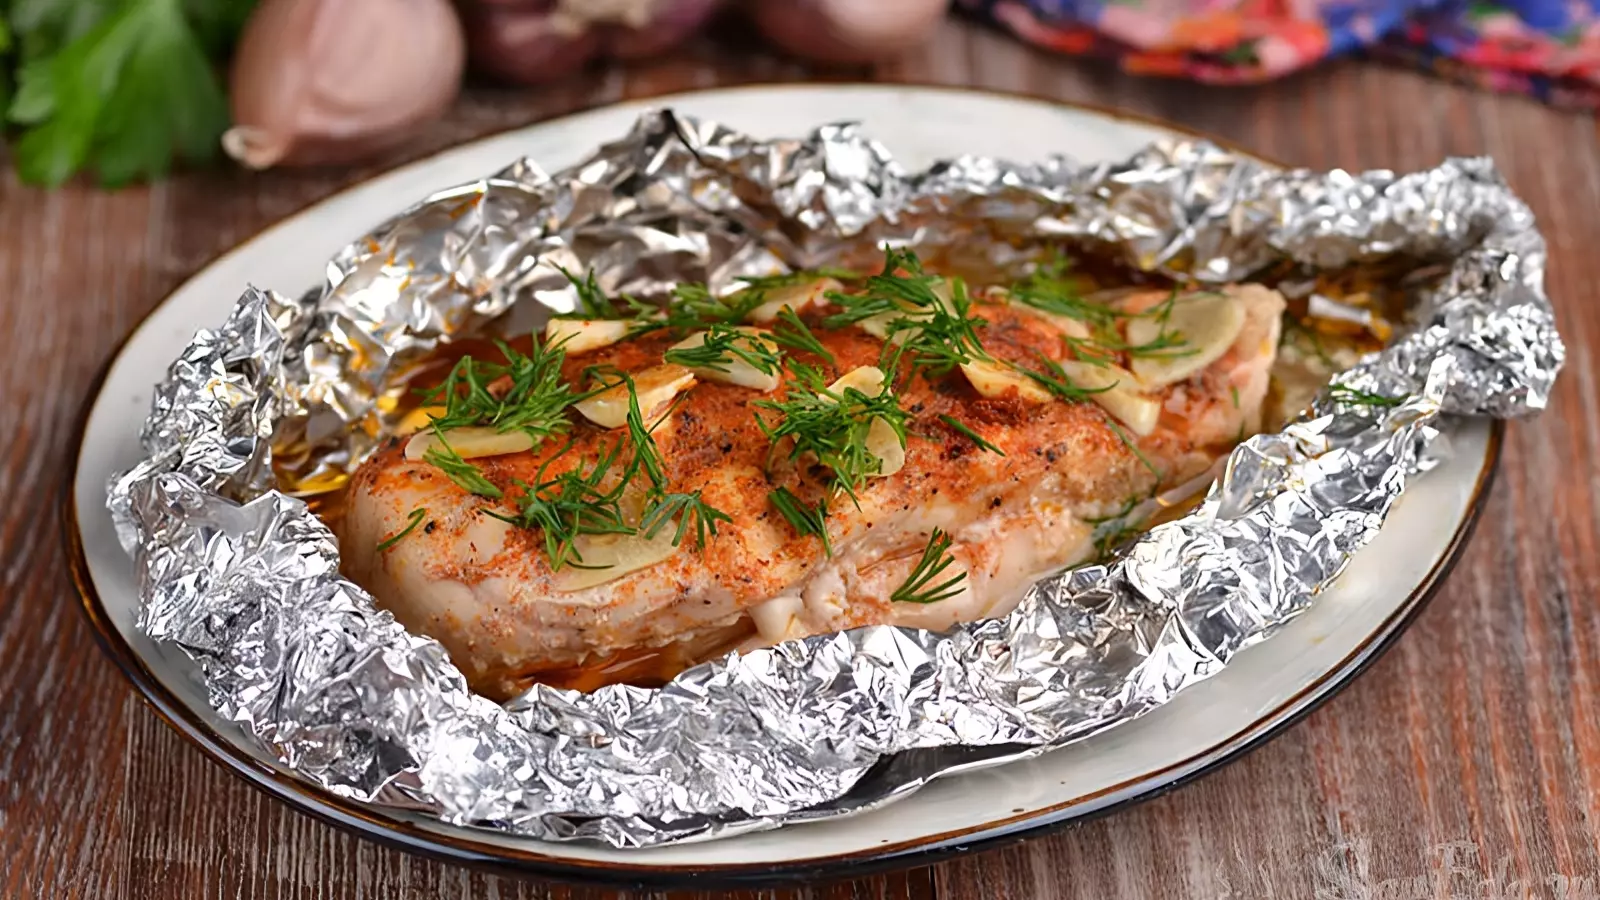 Wrapping in foil and baking chicken breast